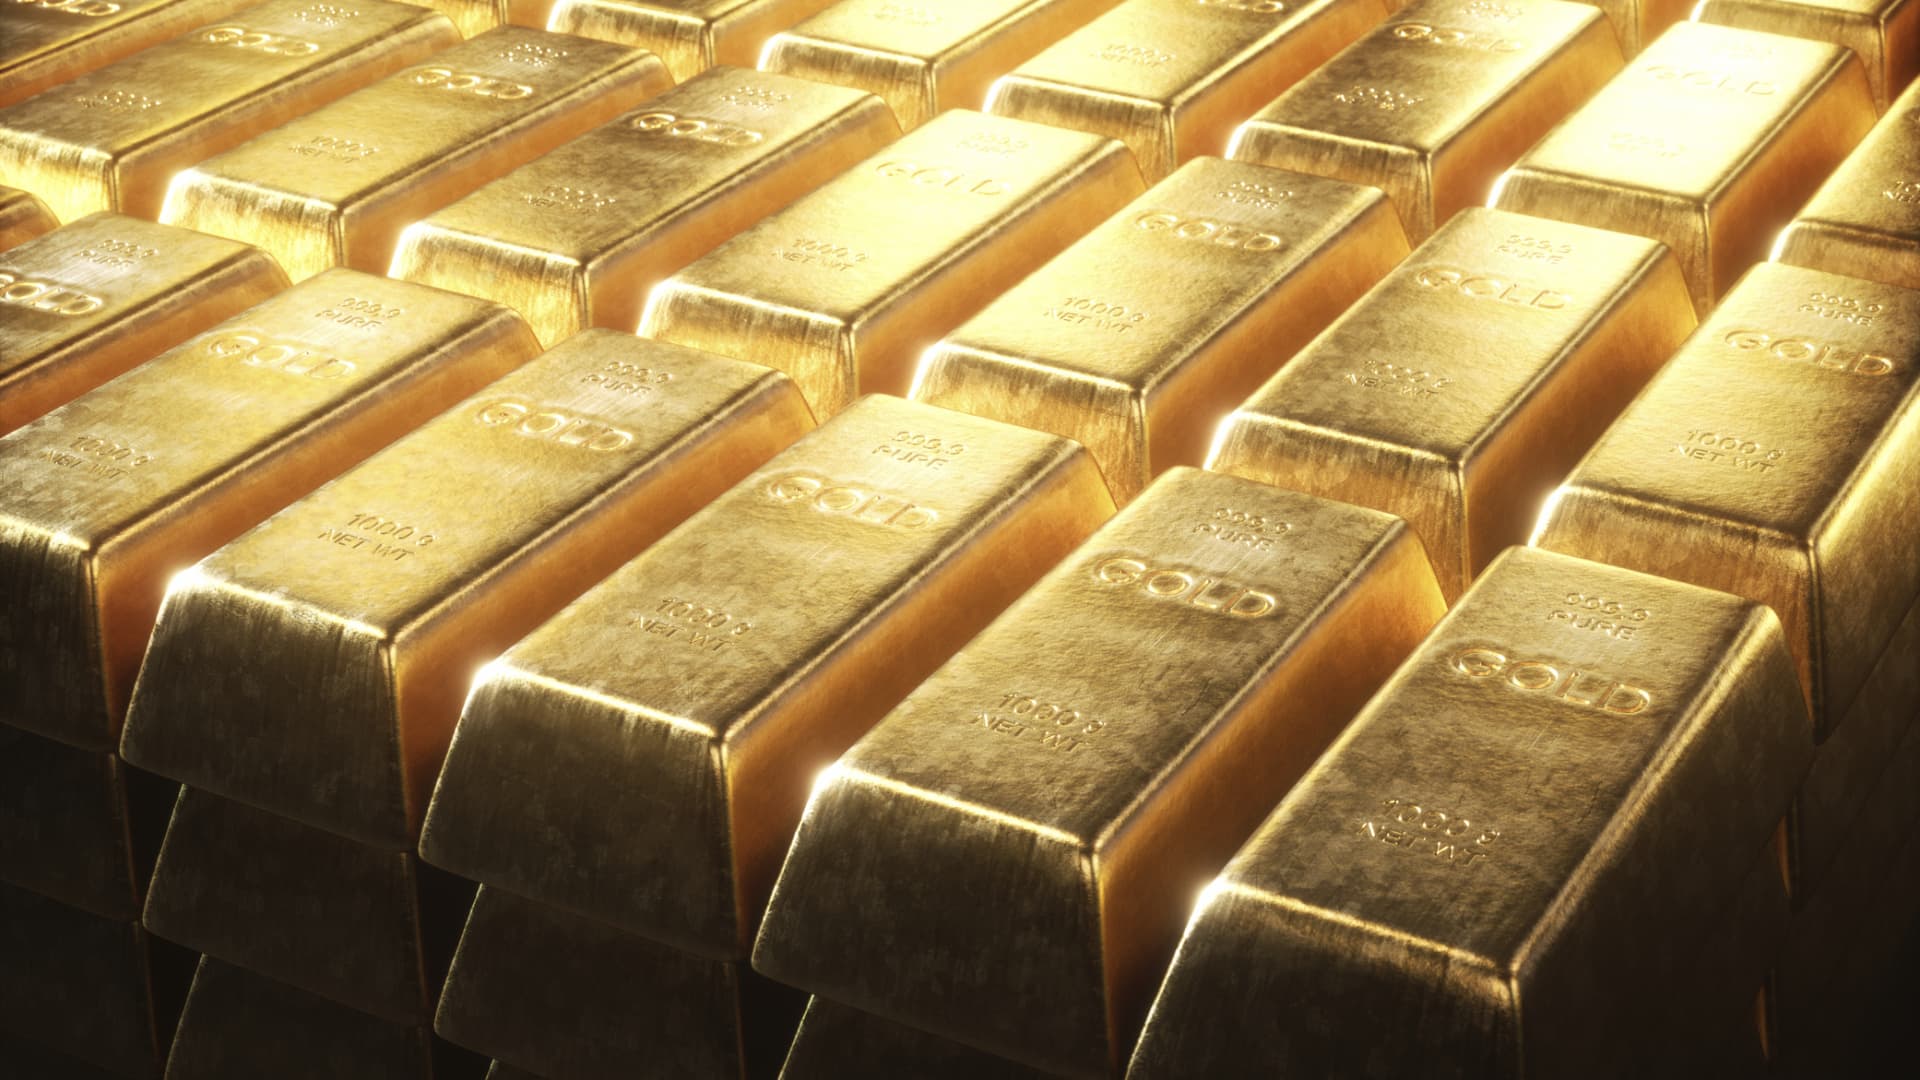 How to invest in gold, and is now a good time to buy?